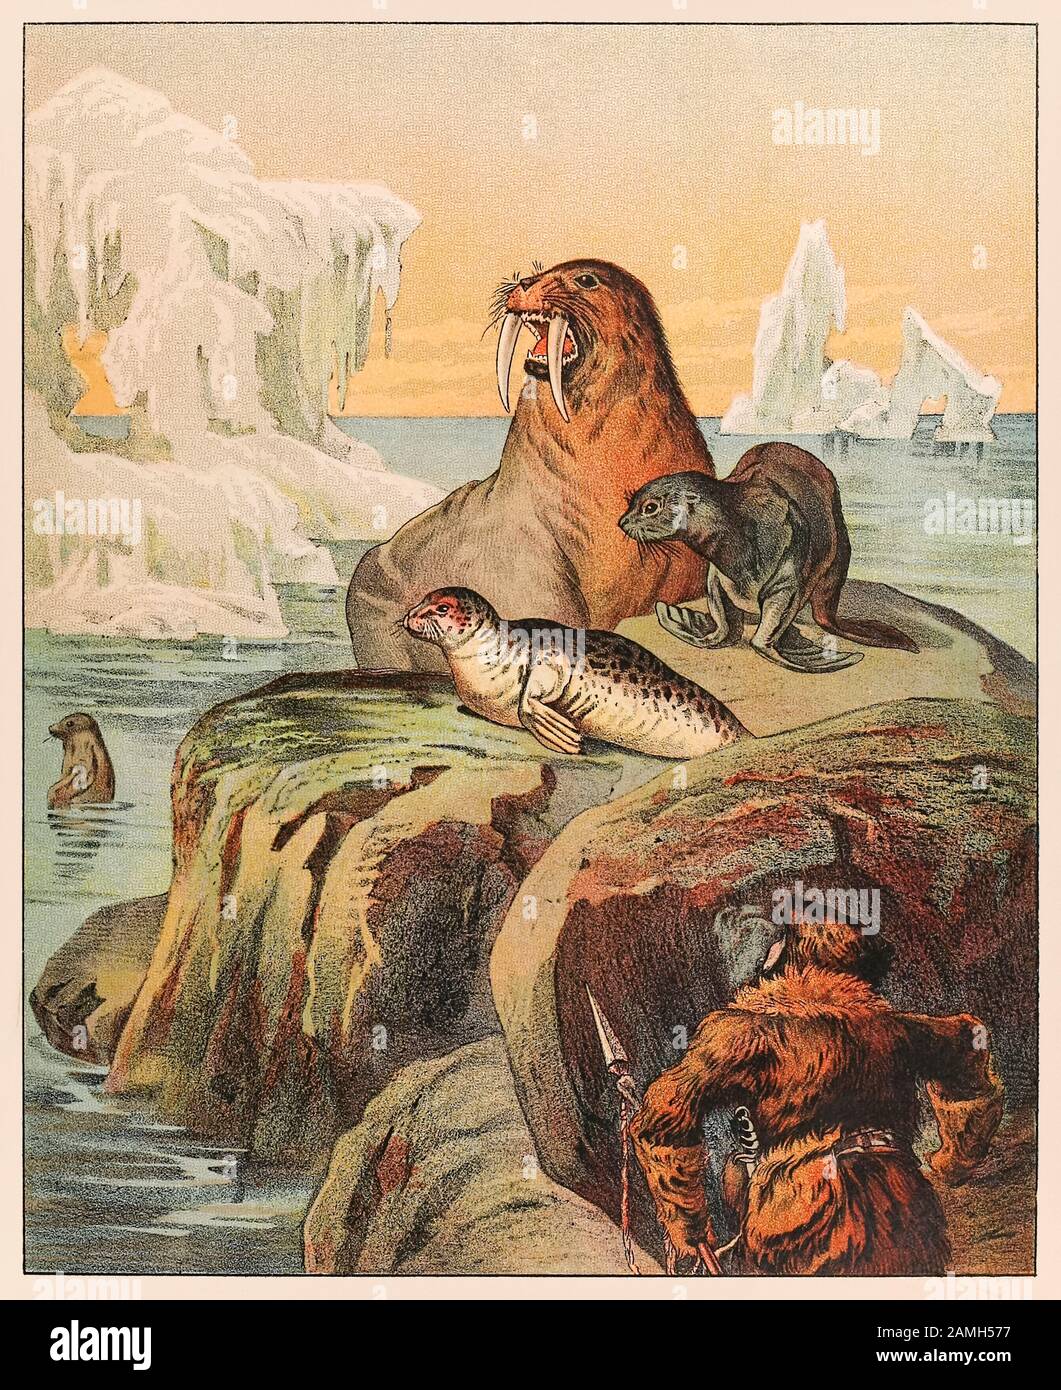 An Eskimo hunting seals and a walrus, from P.T. Barnum’s Menagerie published in 1888, illustration by Sarah J. Burke. Stock Photo